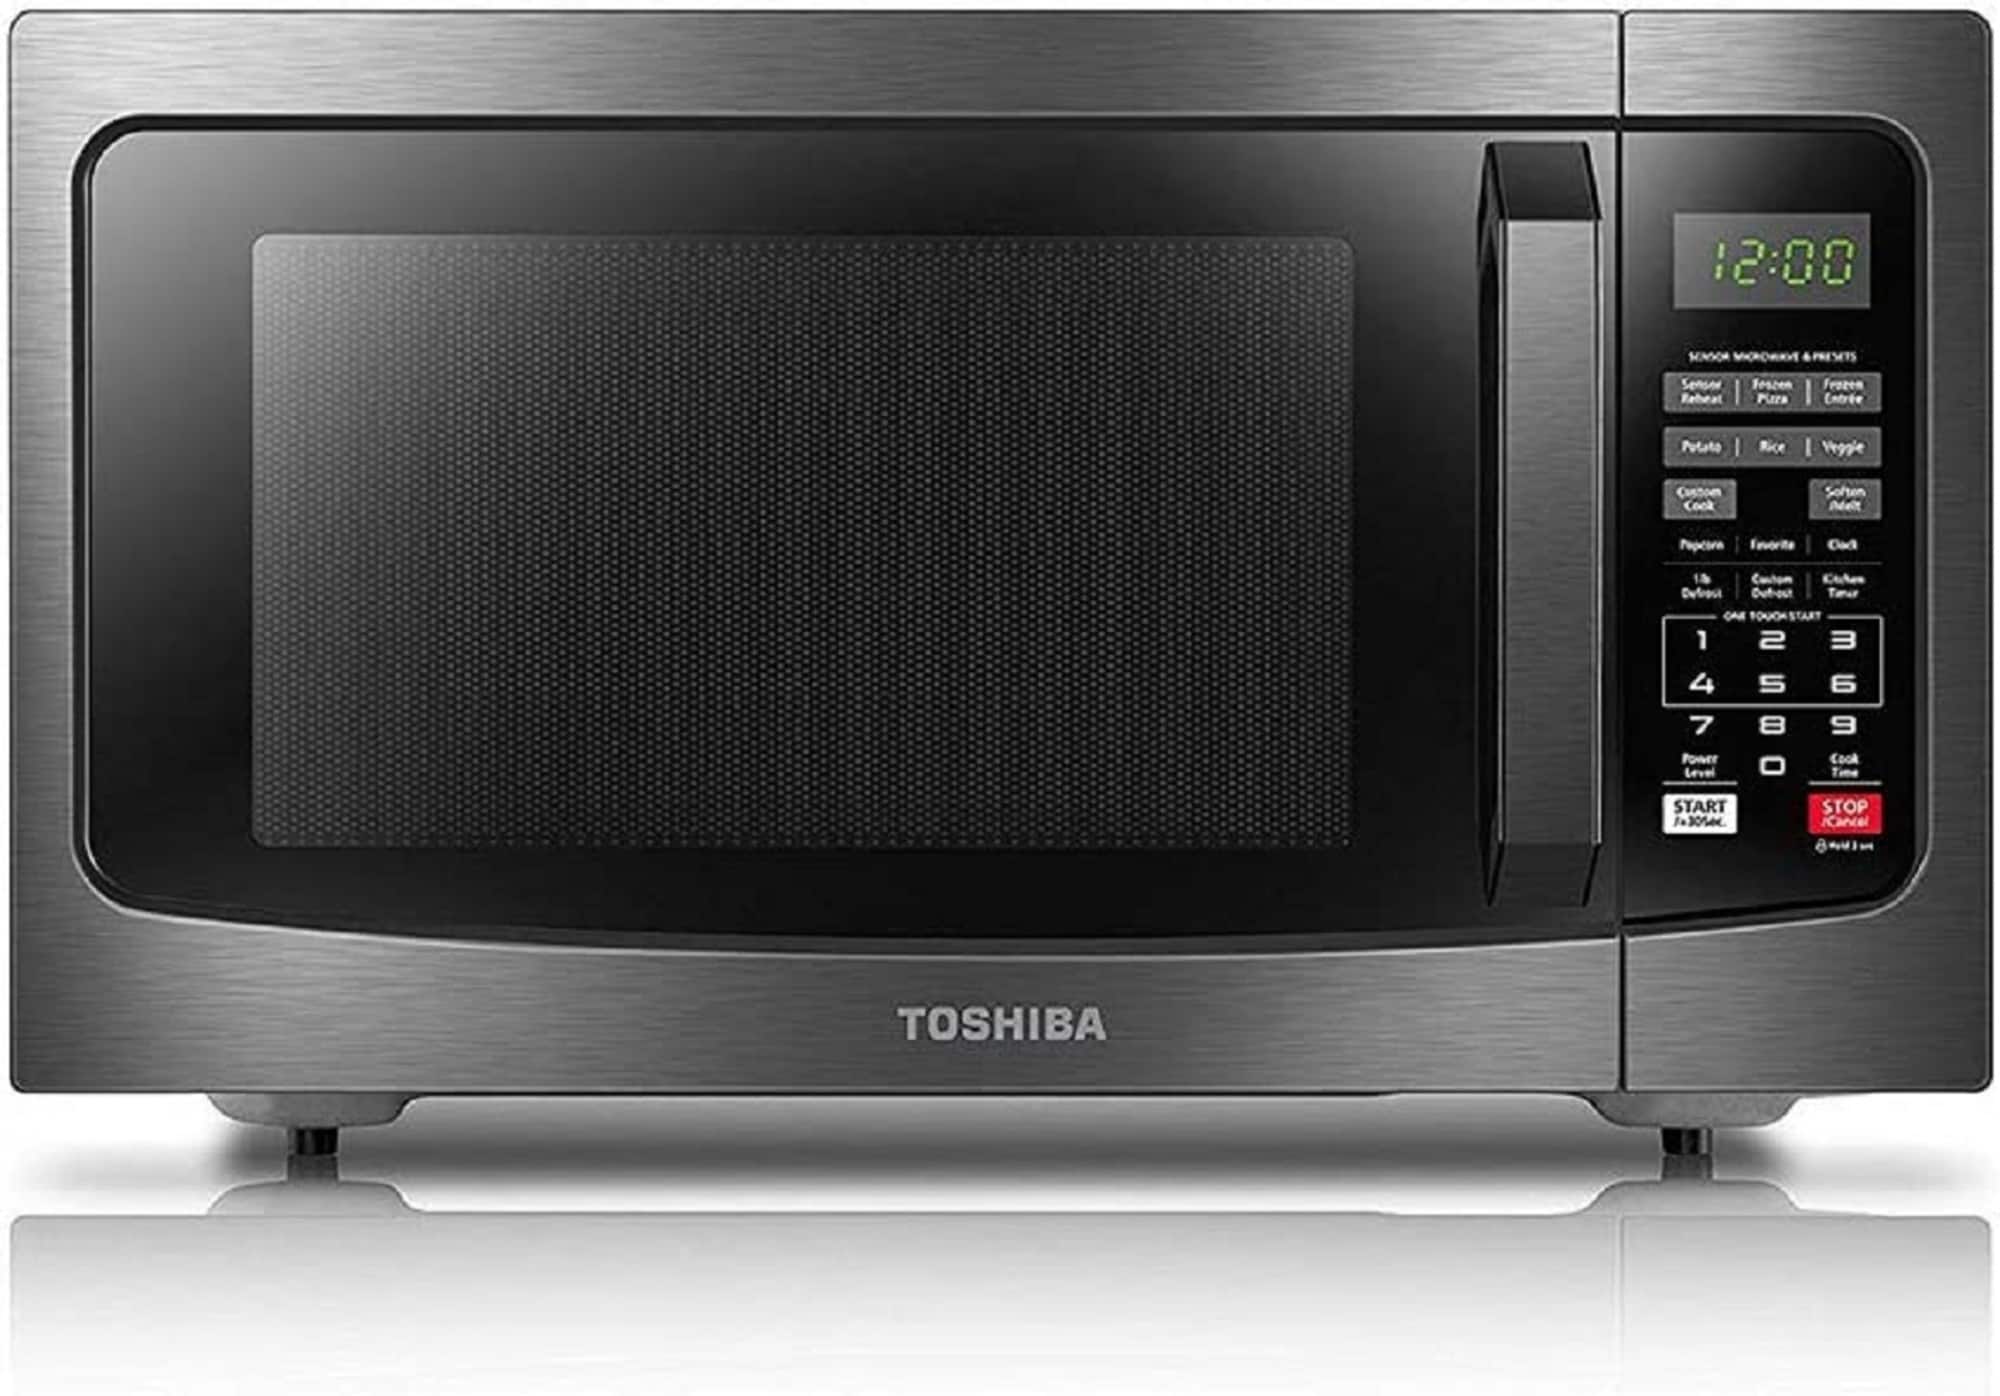 Toshiba 1.2 Cu. ft. Stainless Steel Microwave with Air Fryer, Silver